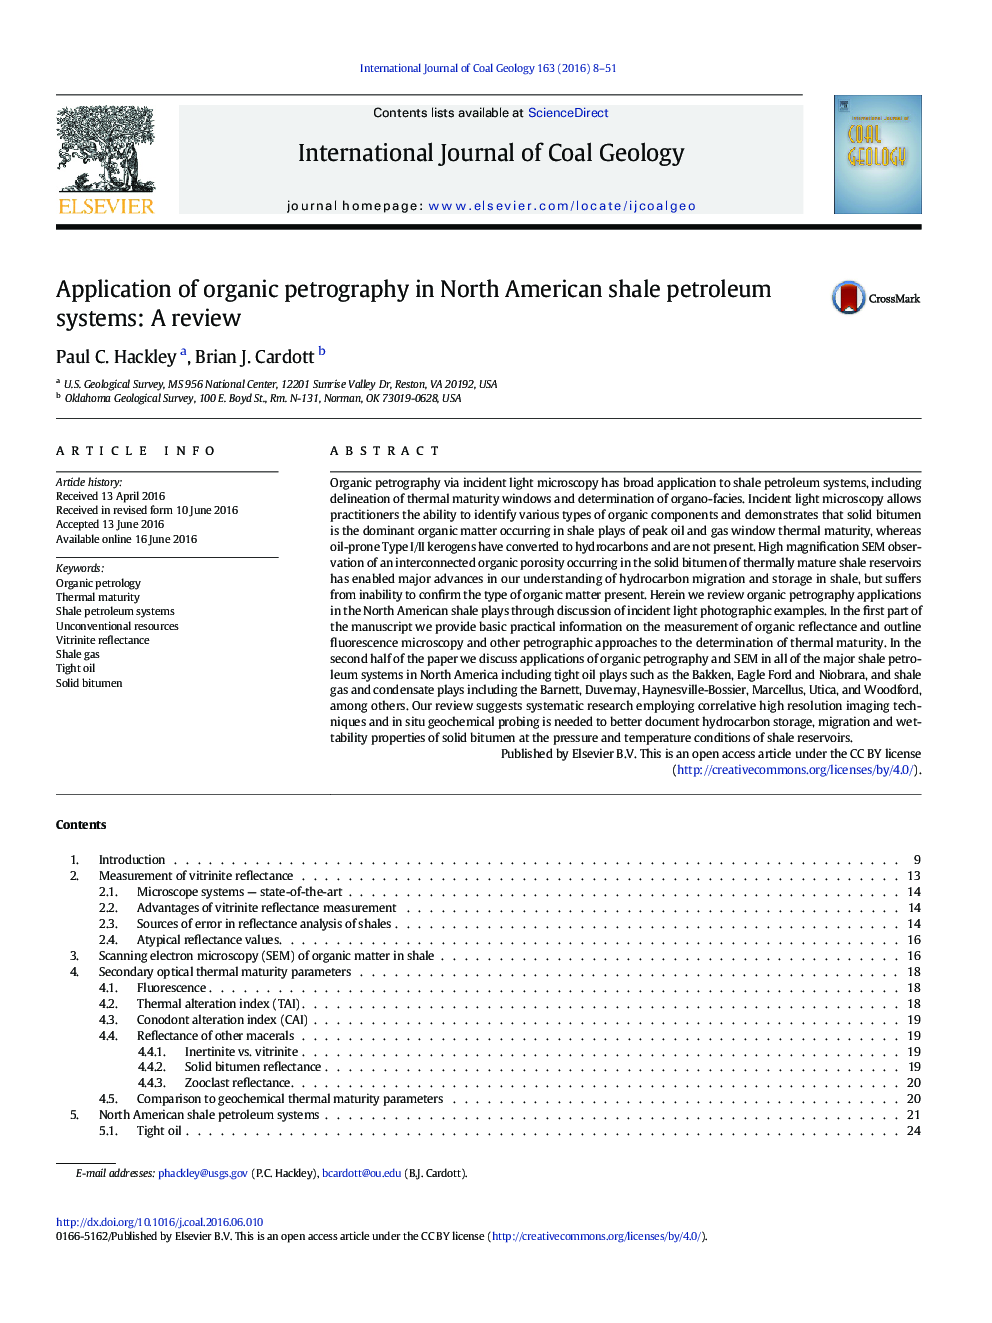 Application of organic petrography in North American shale petroleum systems: A review